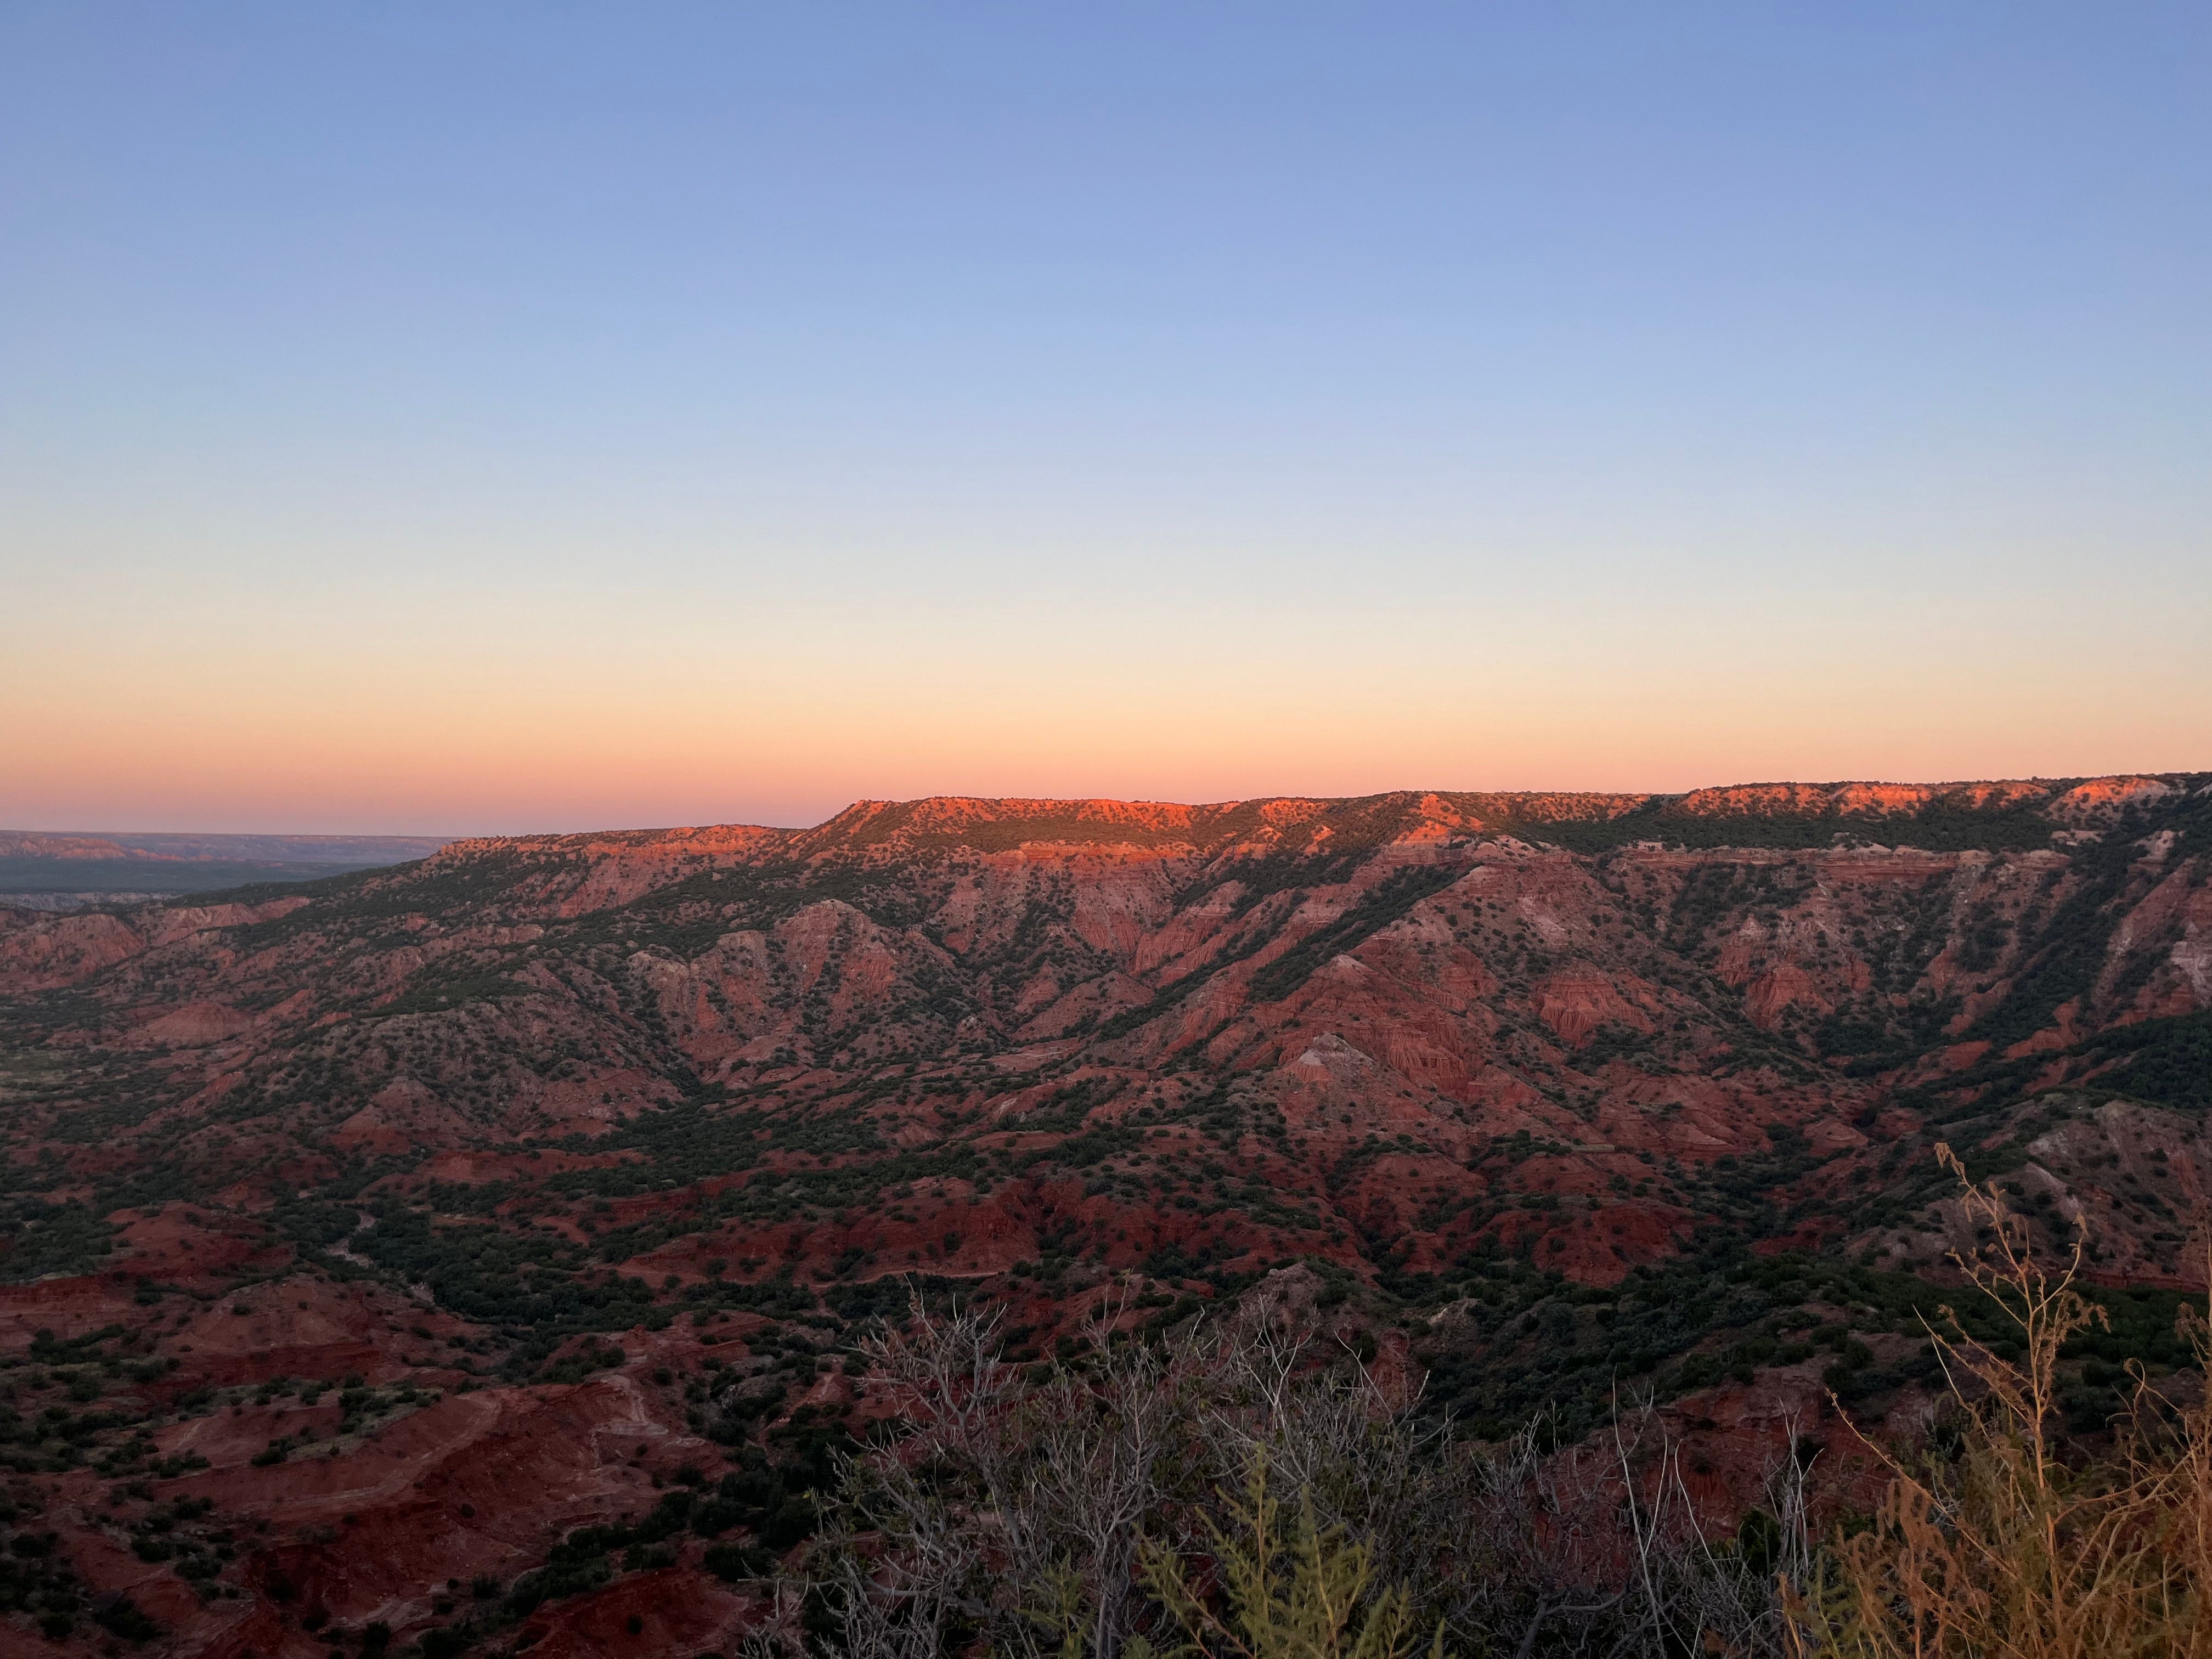 Camper submitted image from SH 207 Palo Duro Canyon Overlook - 1